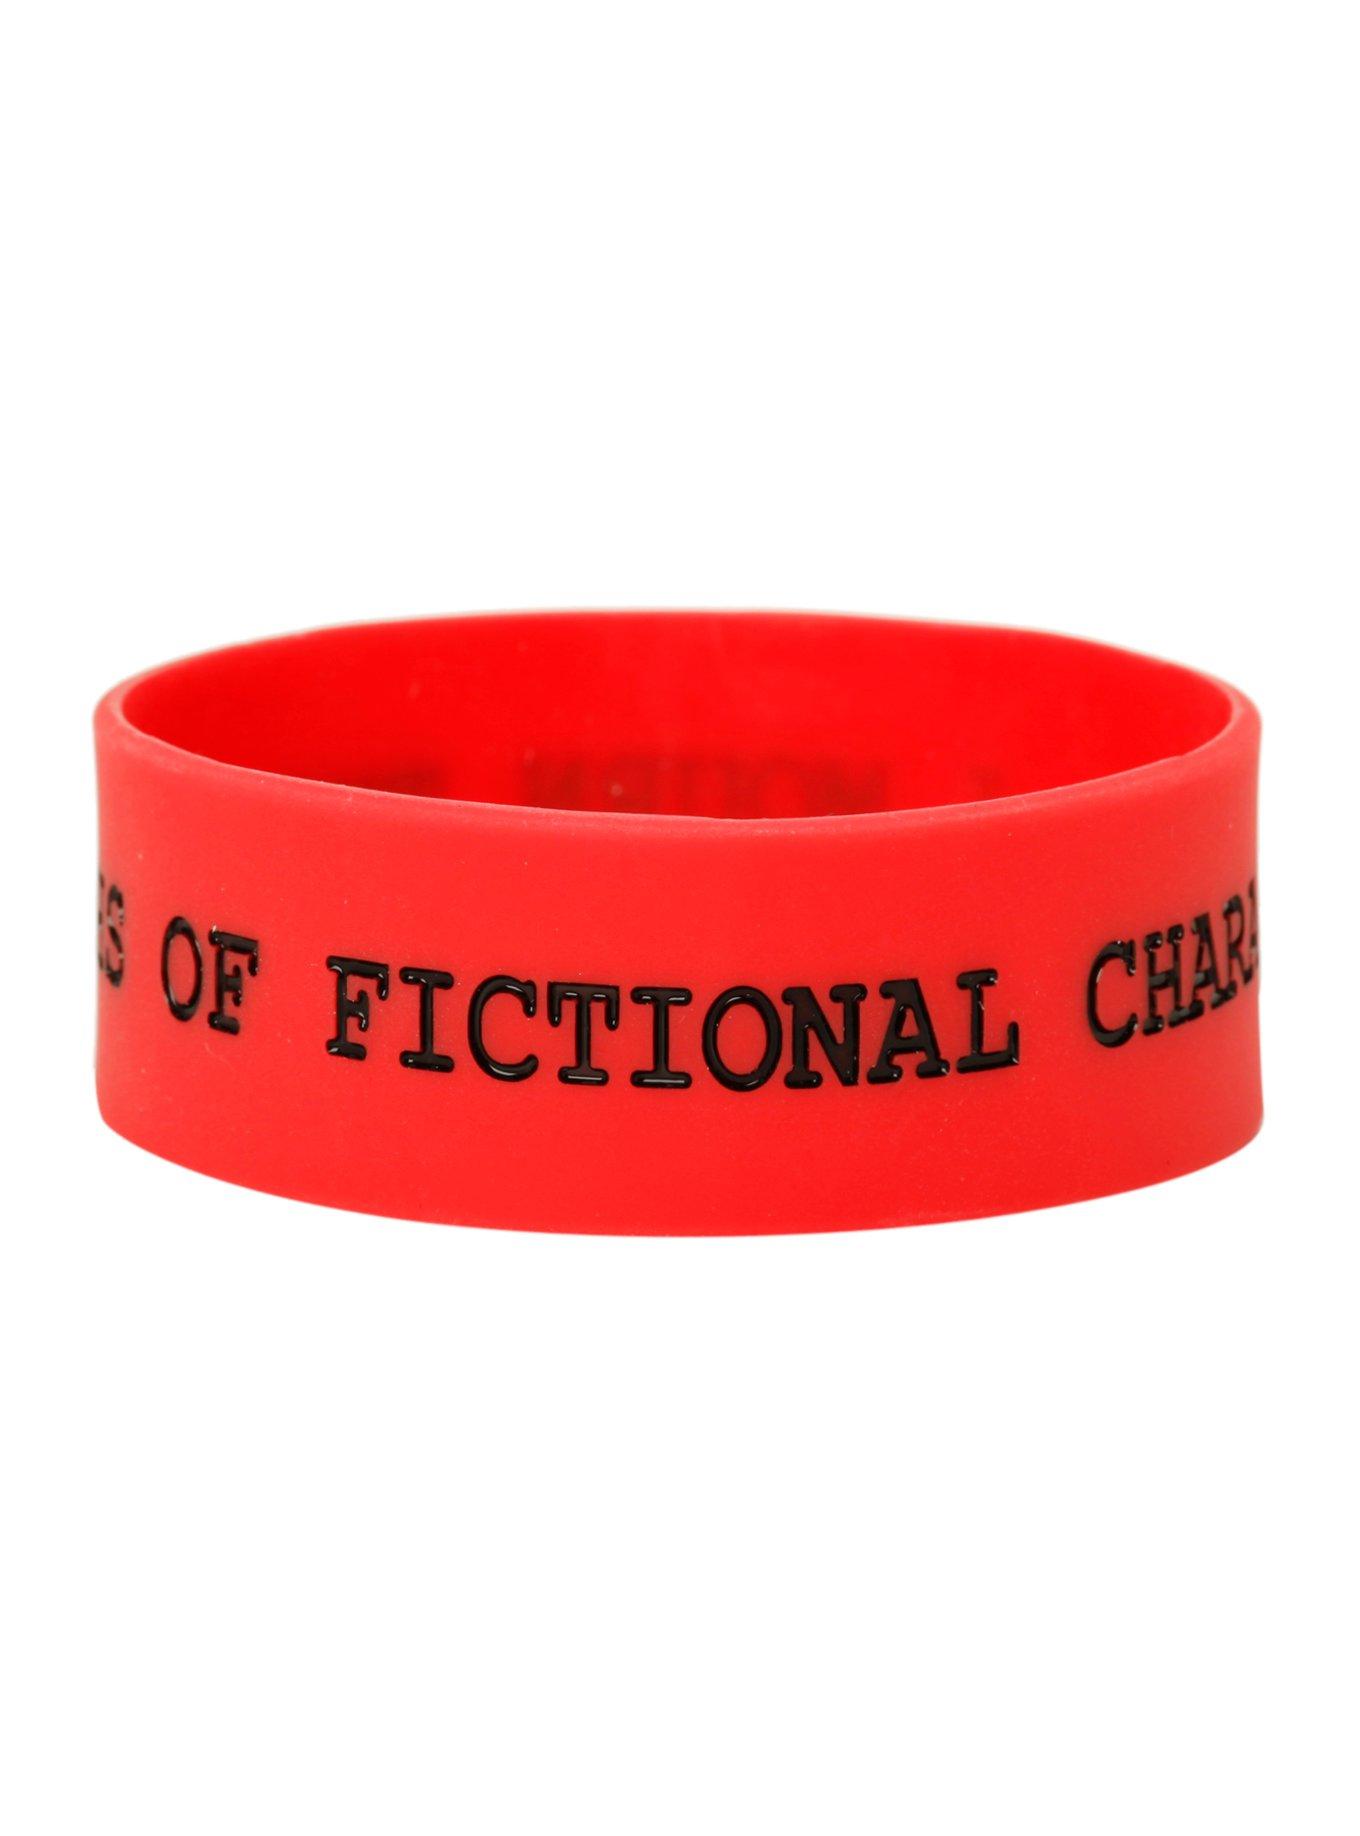 I Mourn The Deaths Of Fictional Characters Rubber Bracelet, , alternate